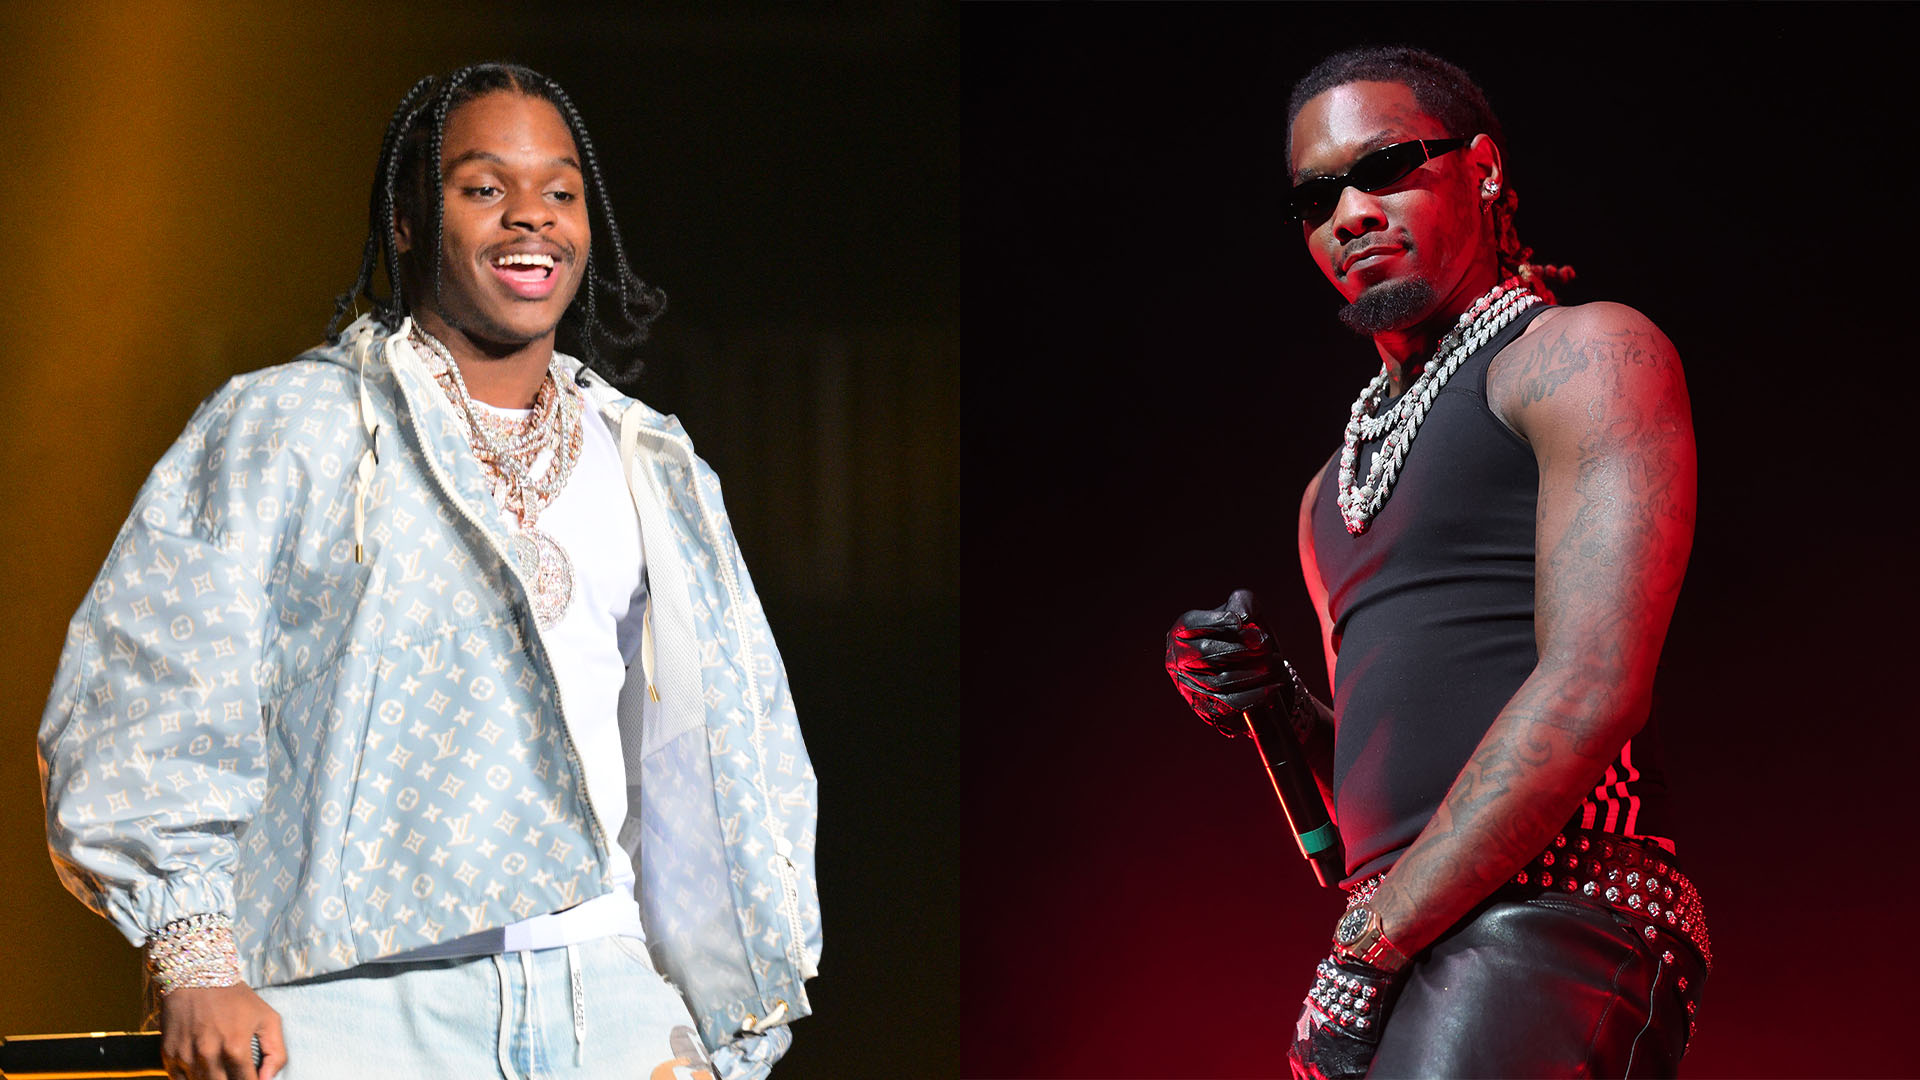 42 Dugg Responds To Accusation That Offset Robbed Him